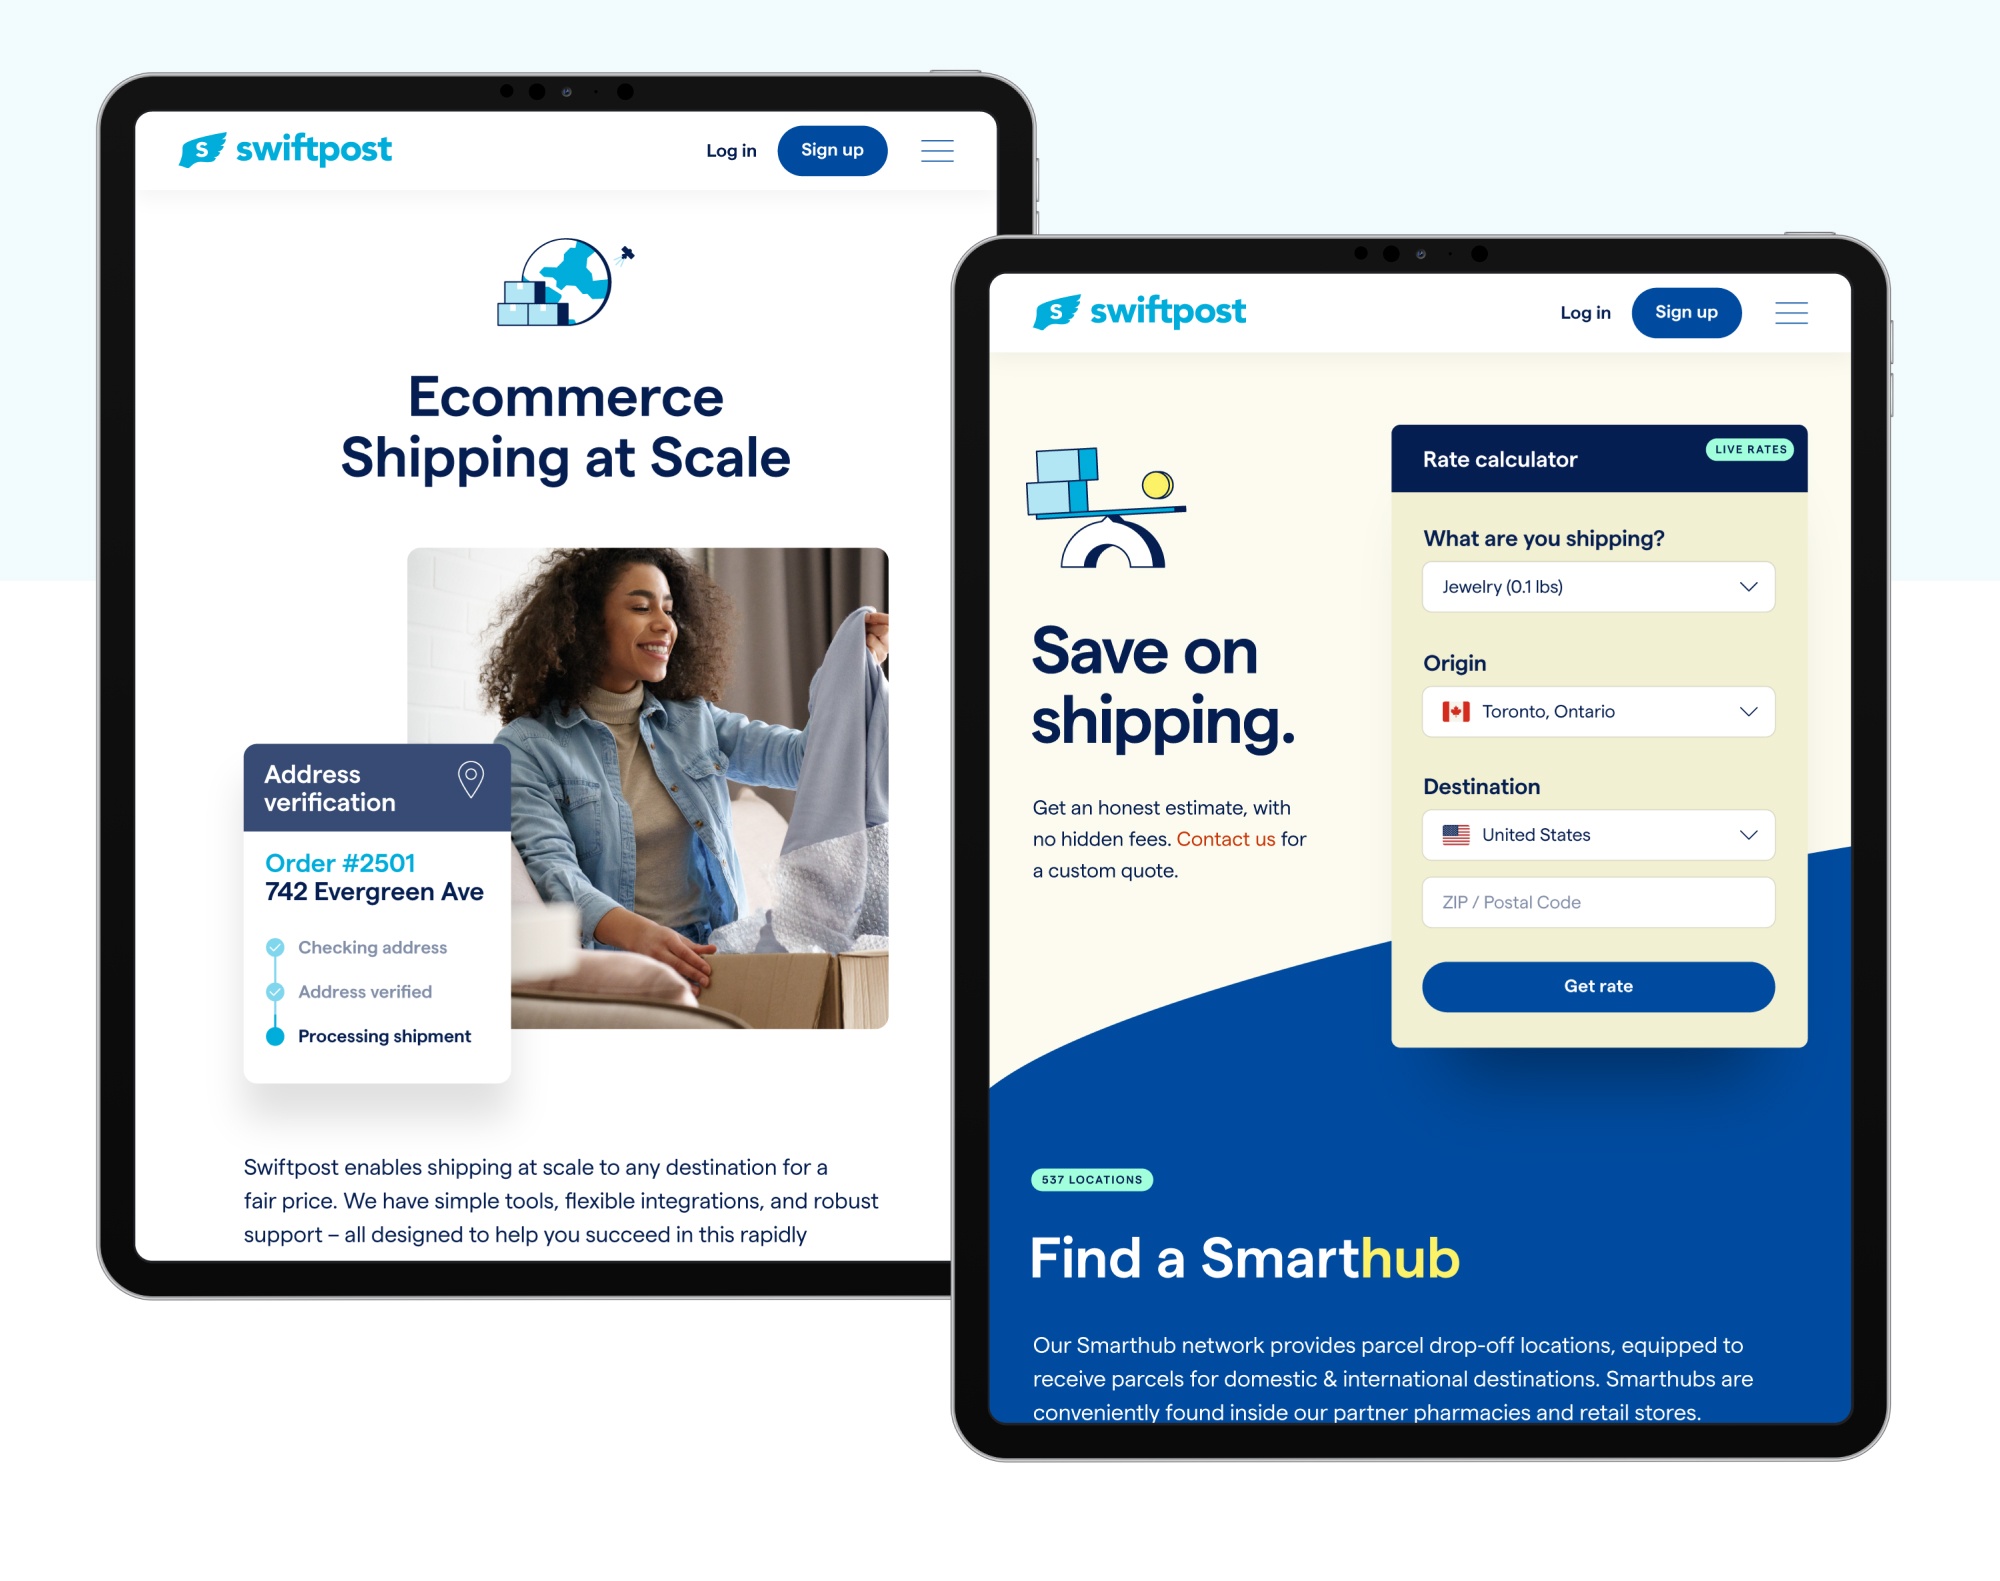 Responsive website design highlights of the swiftpost.com home page